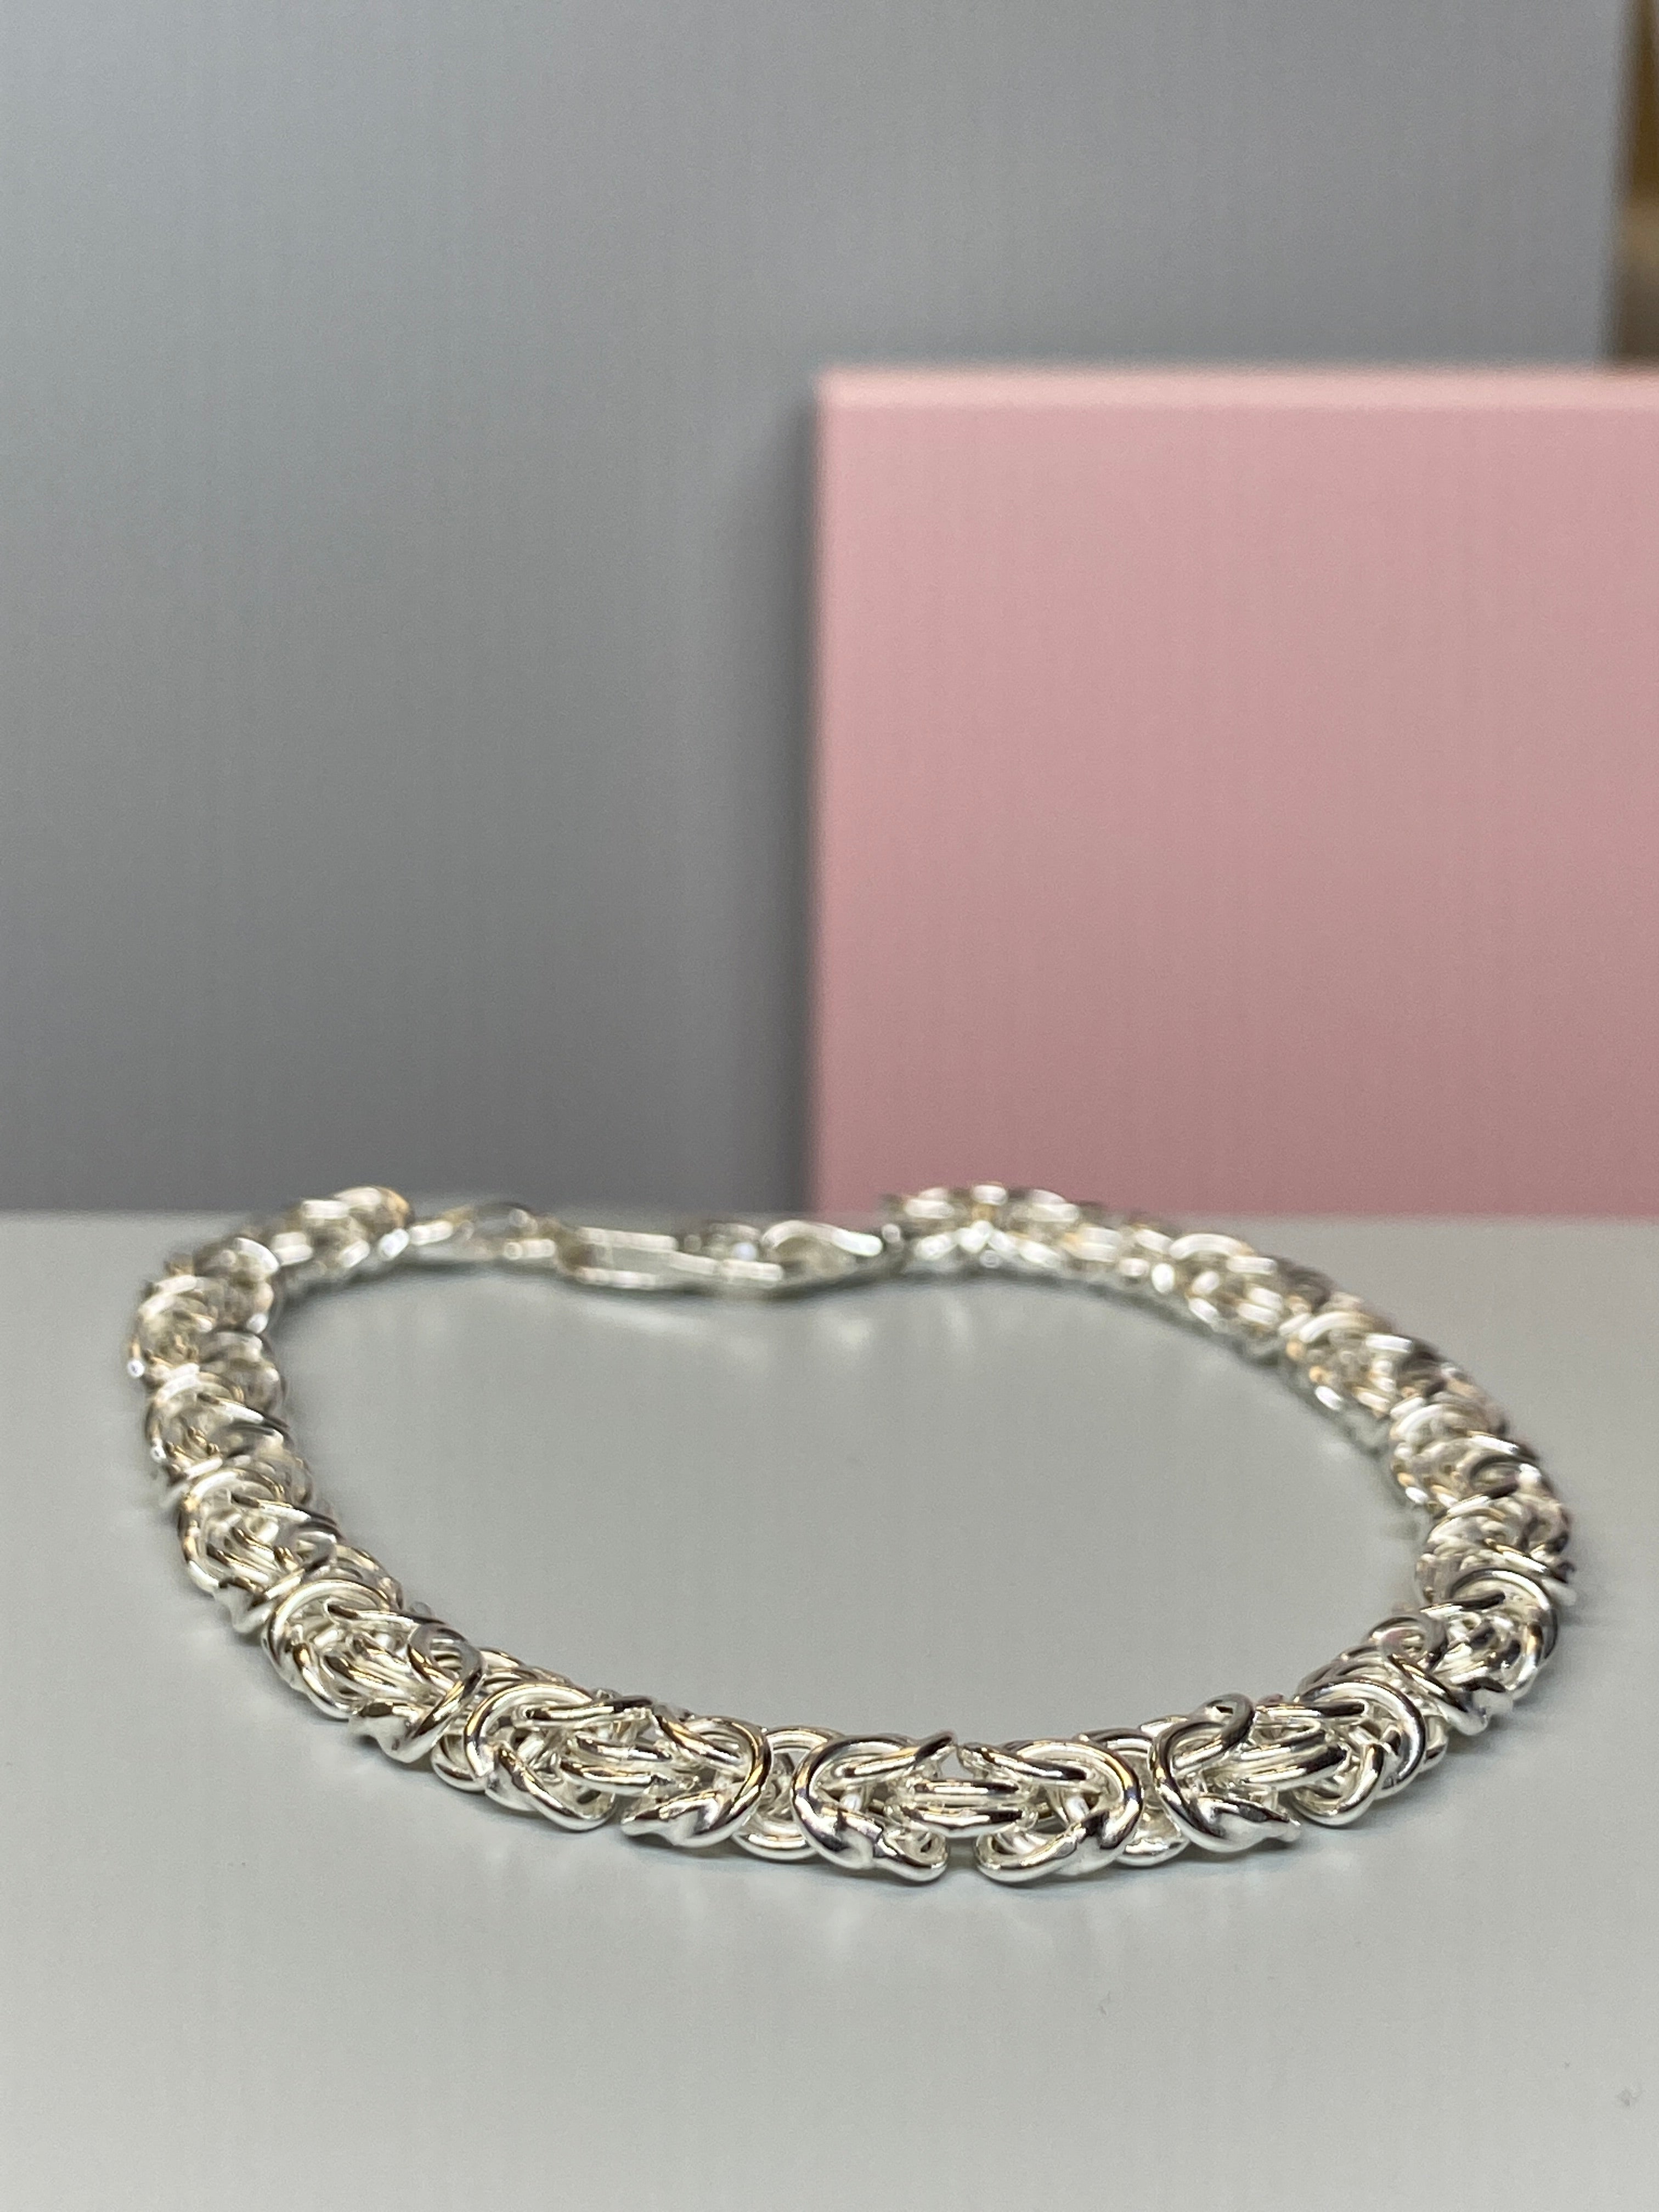 Silver Pattern Bracelet - Hallmark Jewellers Formby & The Jewellers Bench Widnes